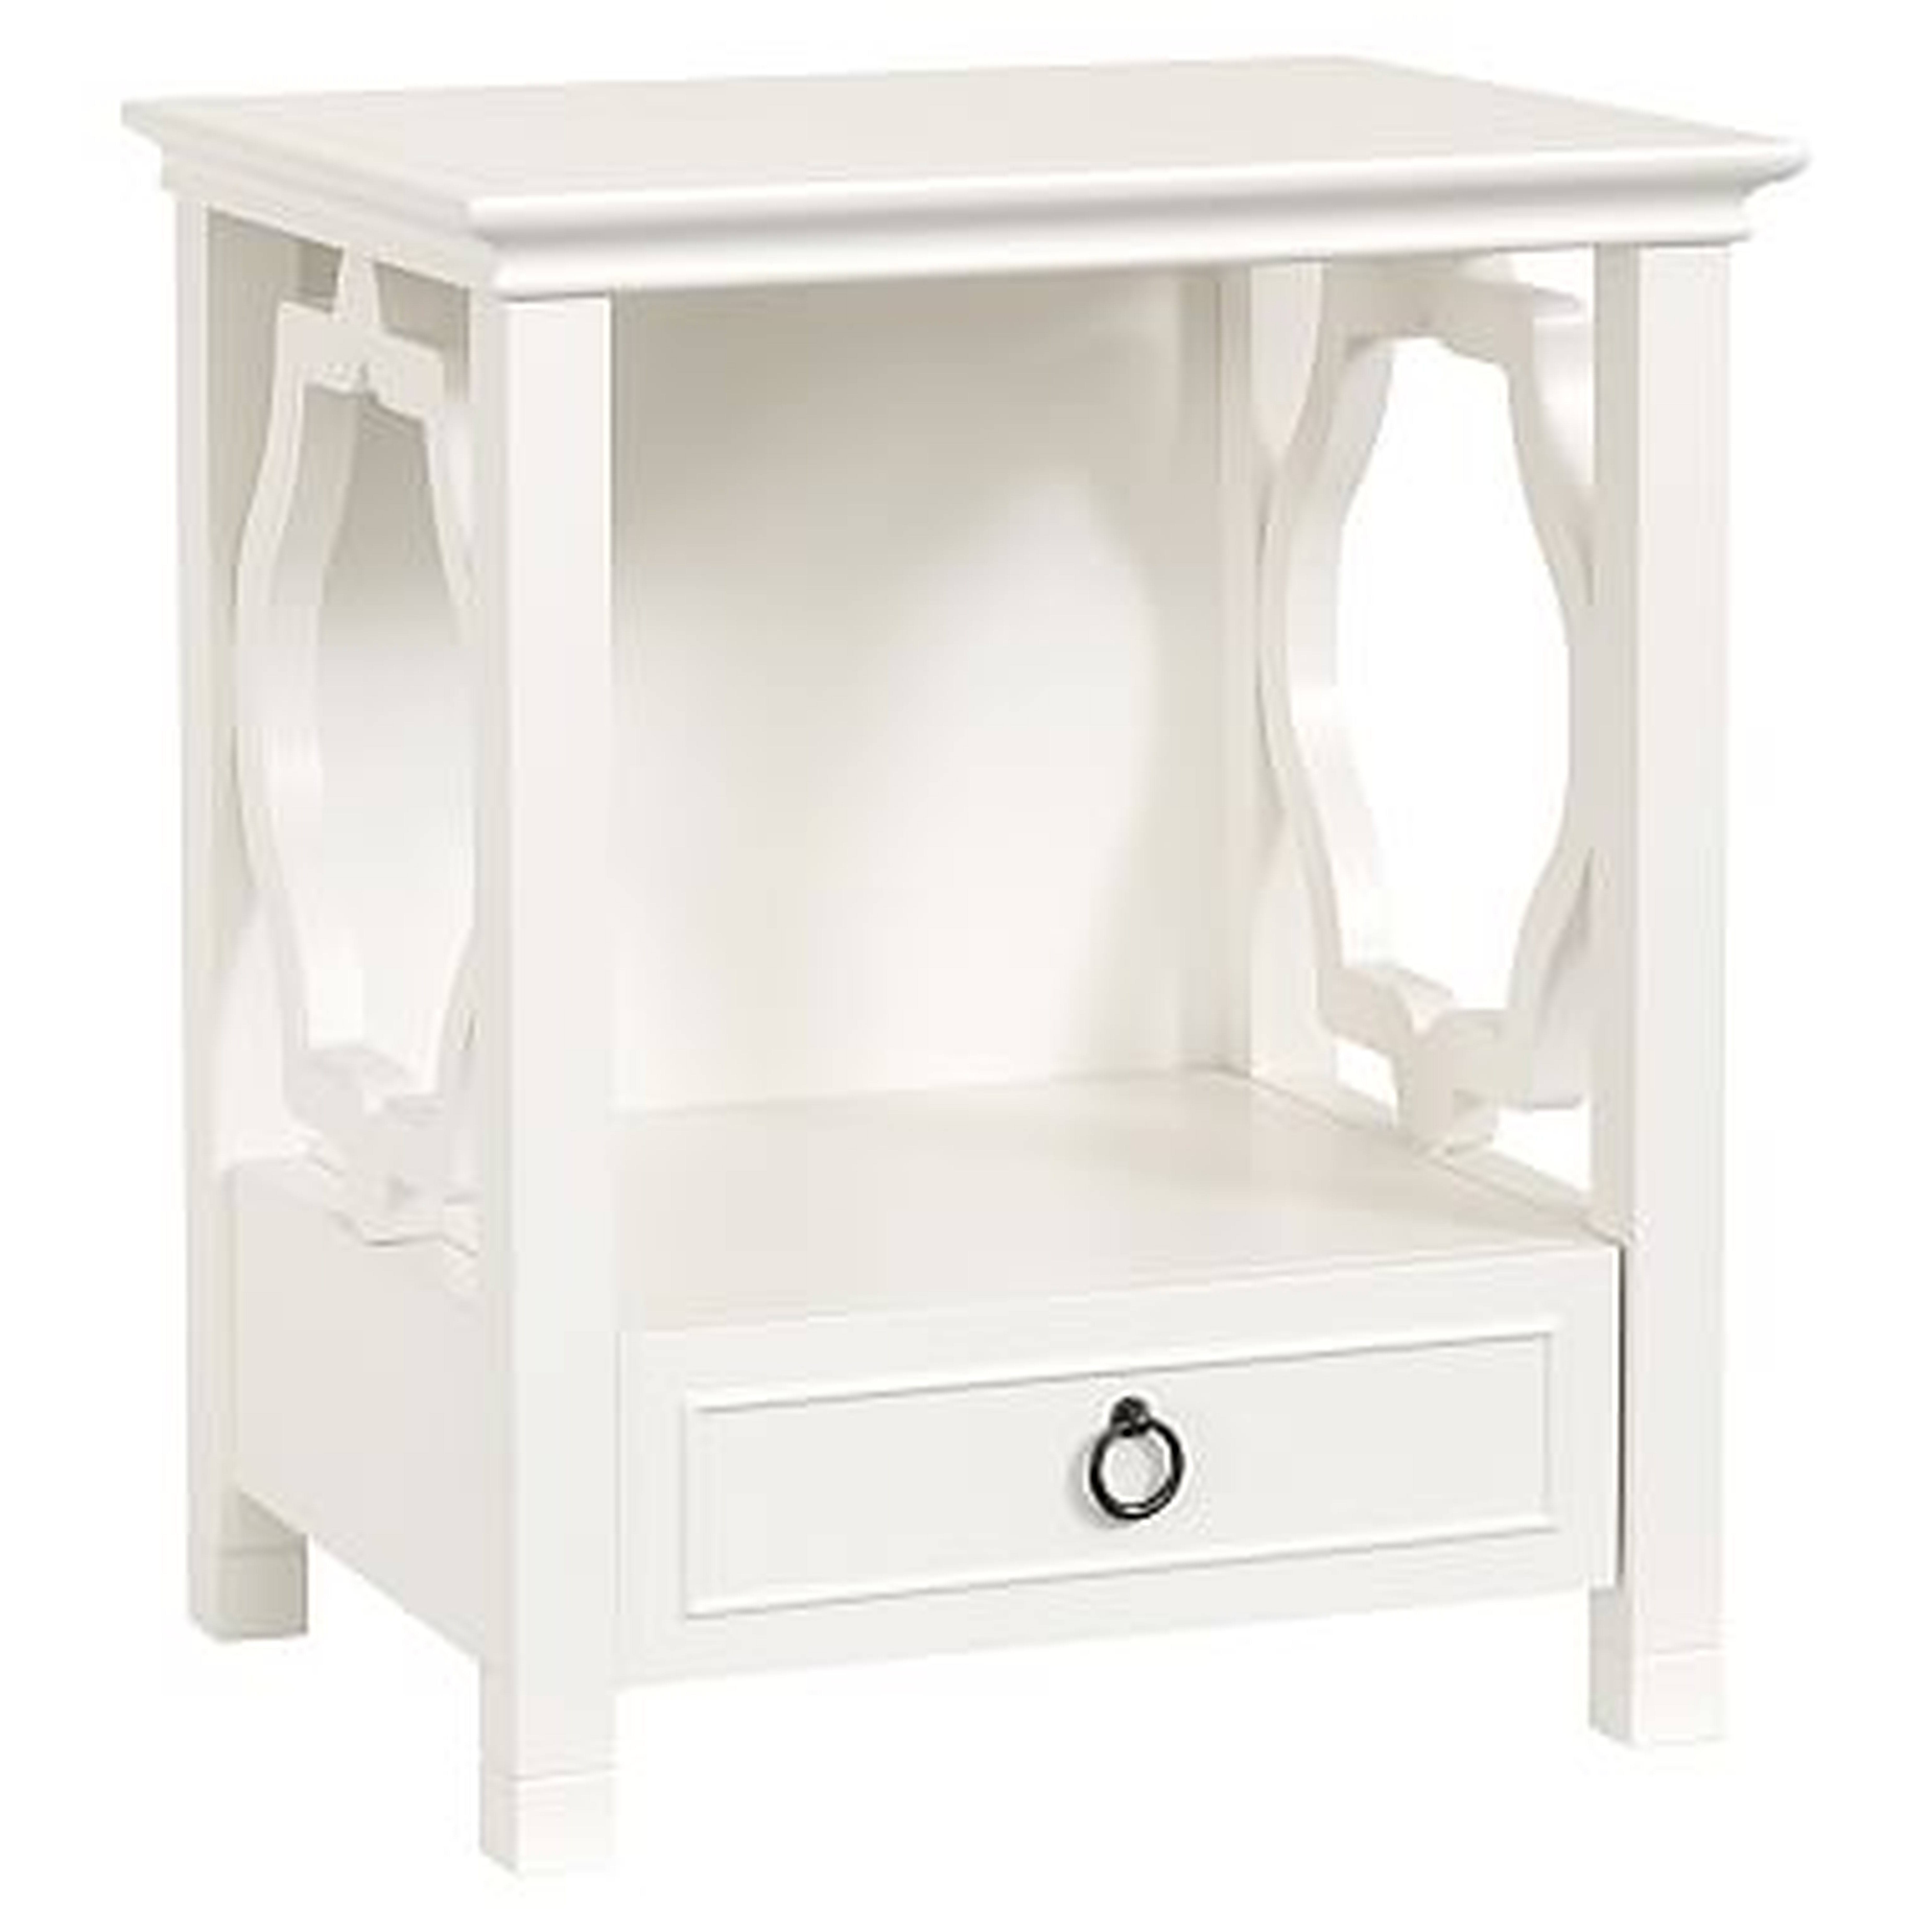 Evie Nightstand, Simply White - Pottery Barn Teen